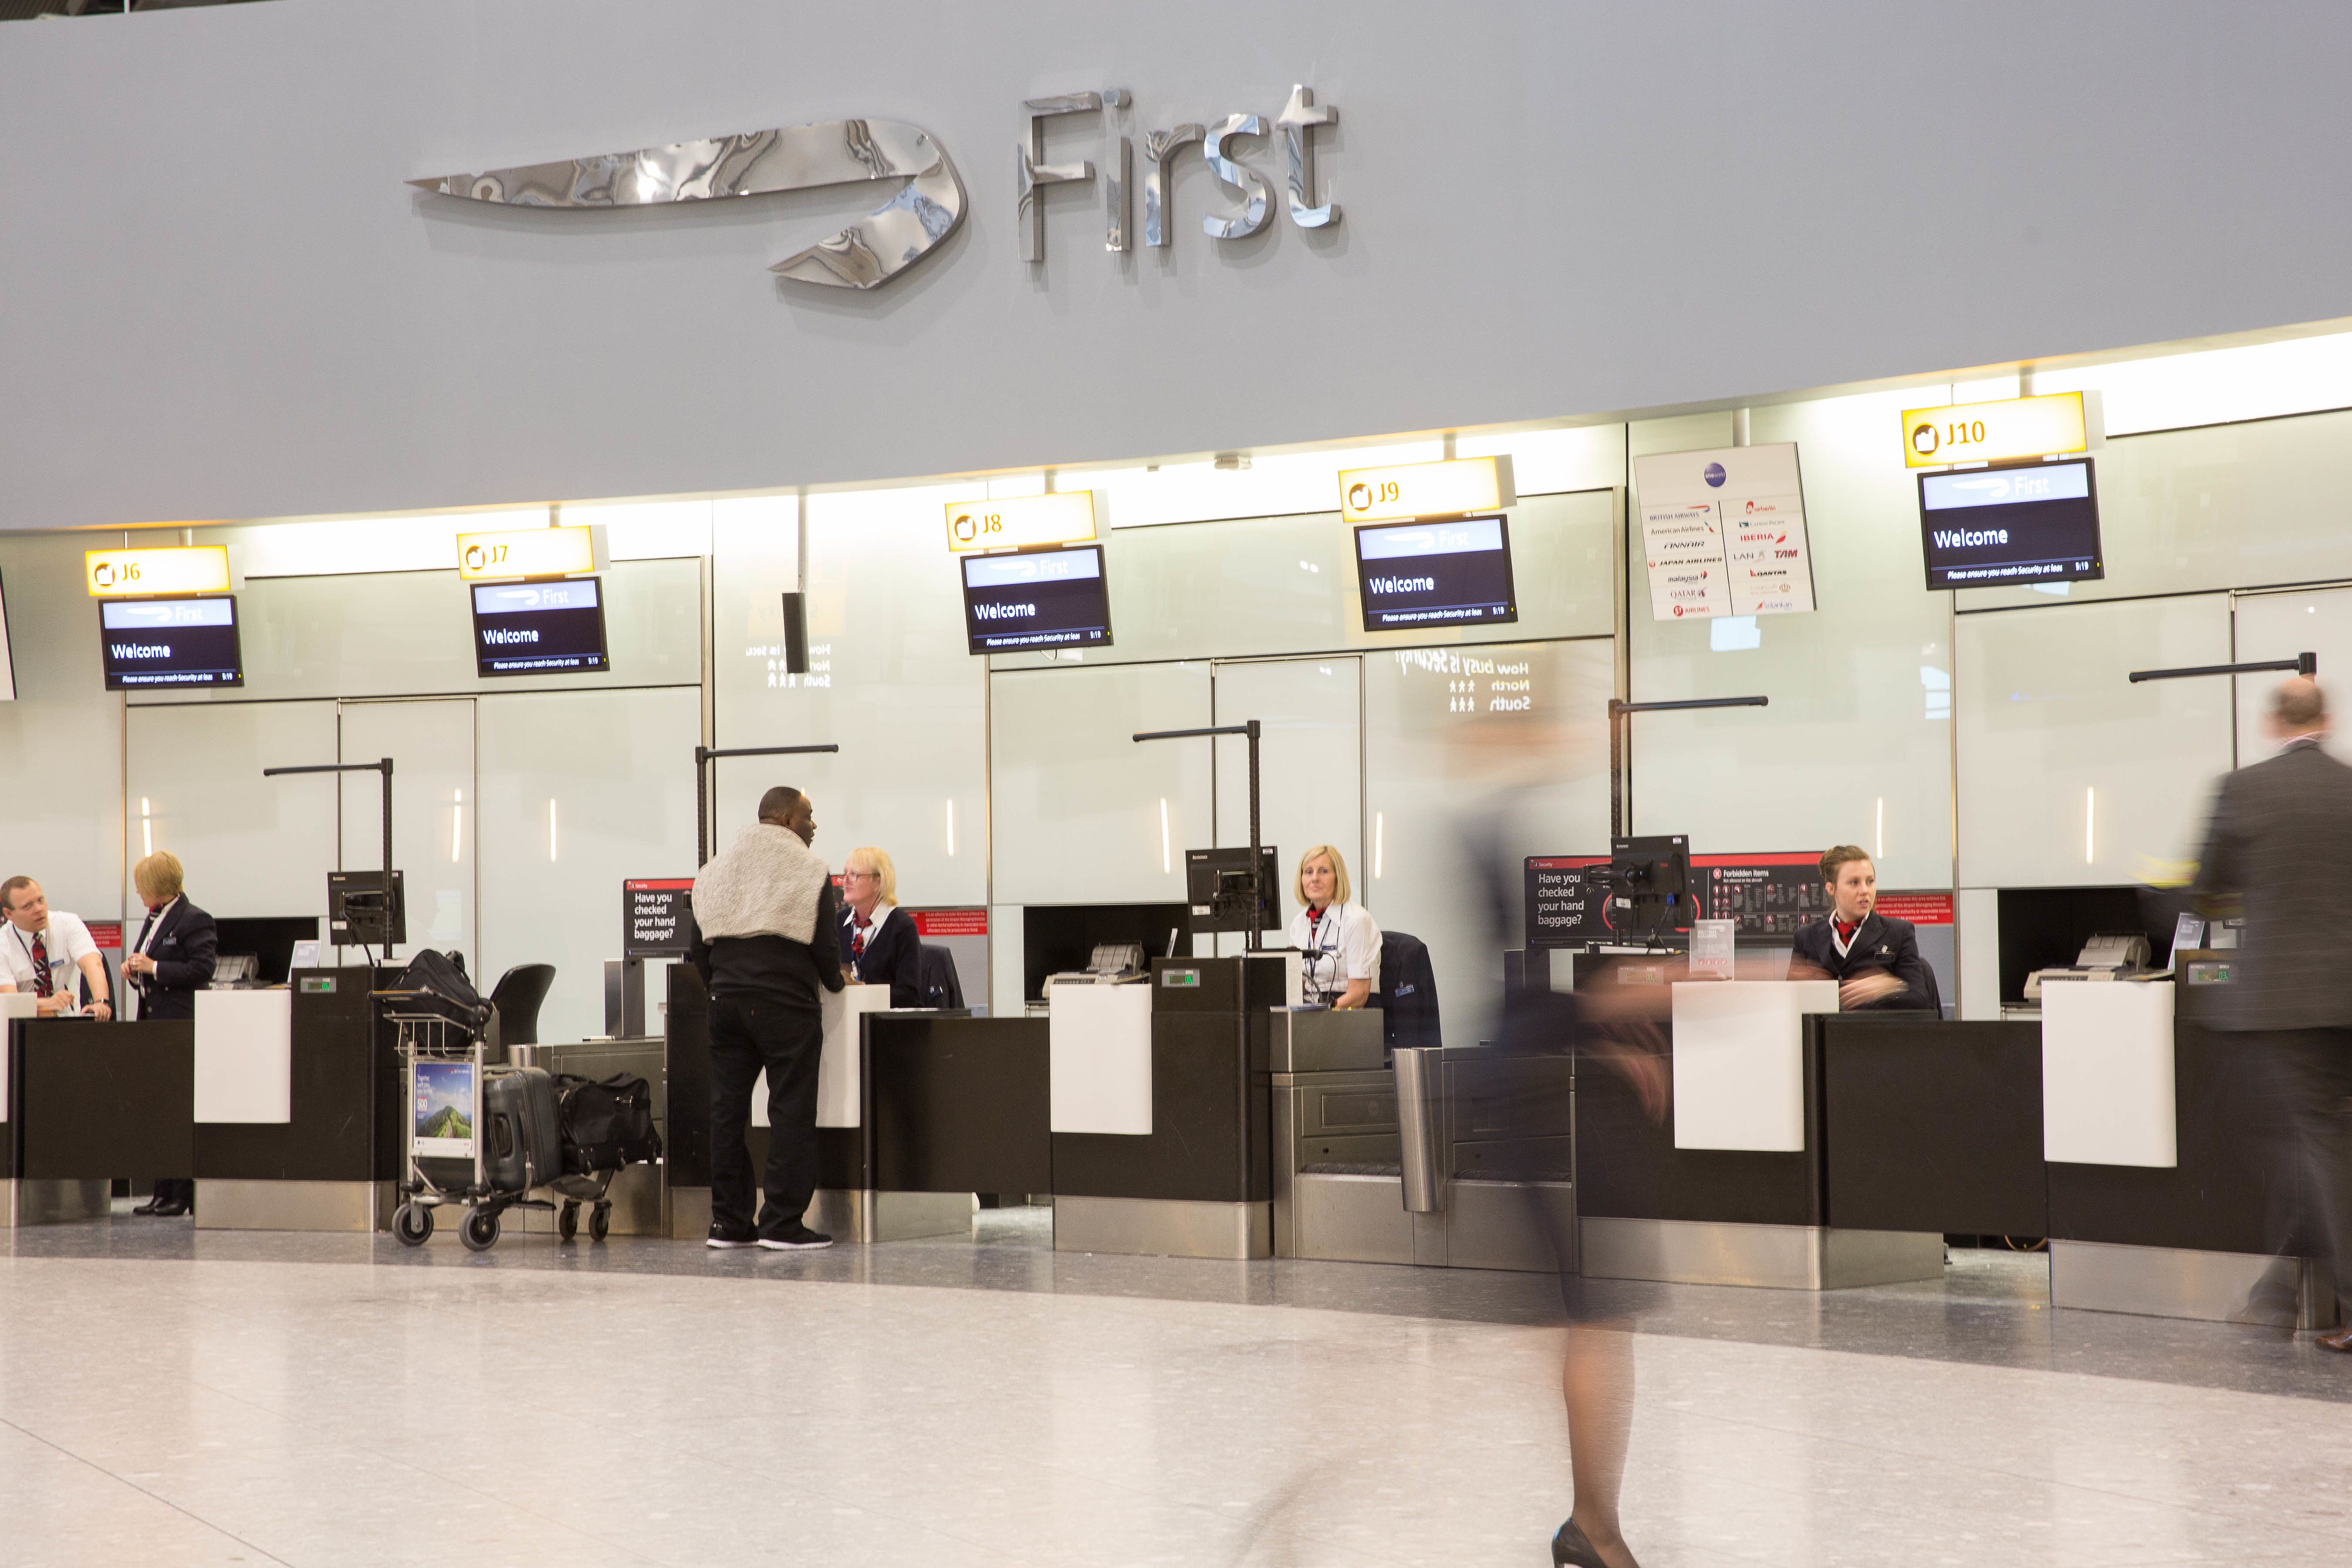 The exclusive check in desks for British Airways First Class passengers.